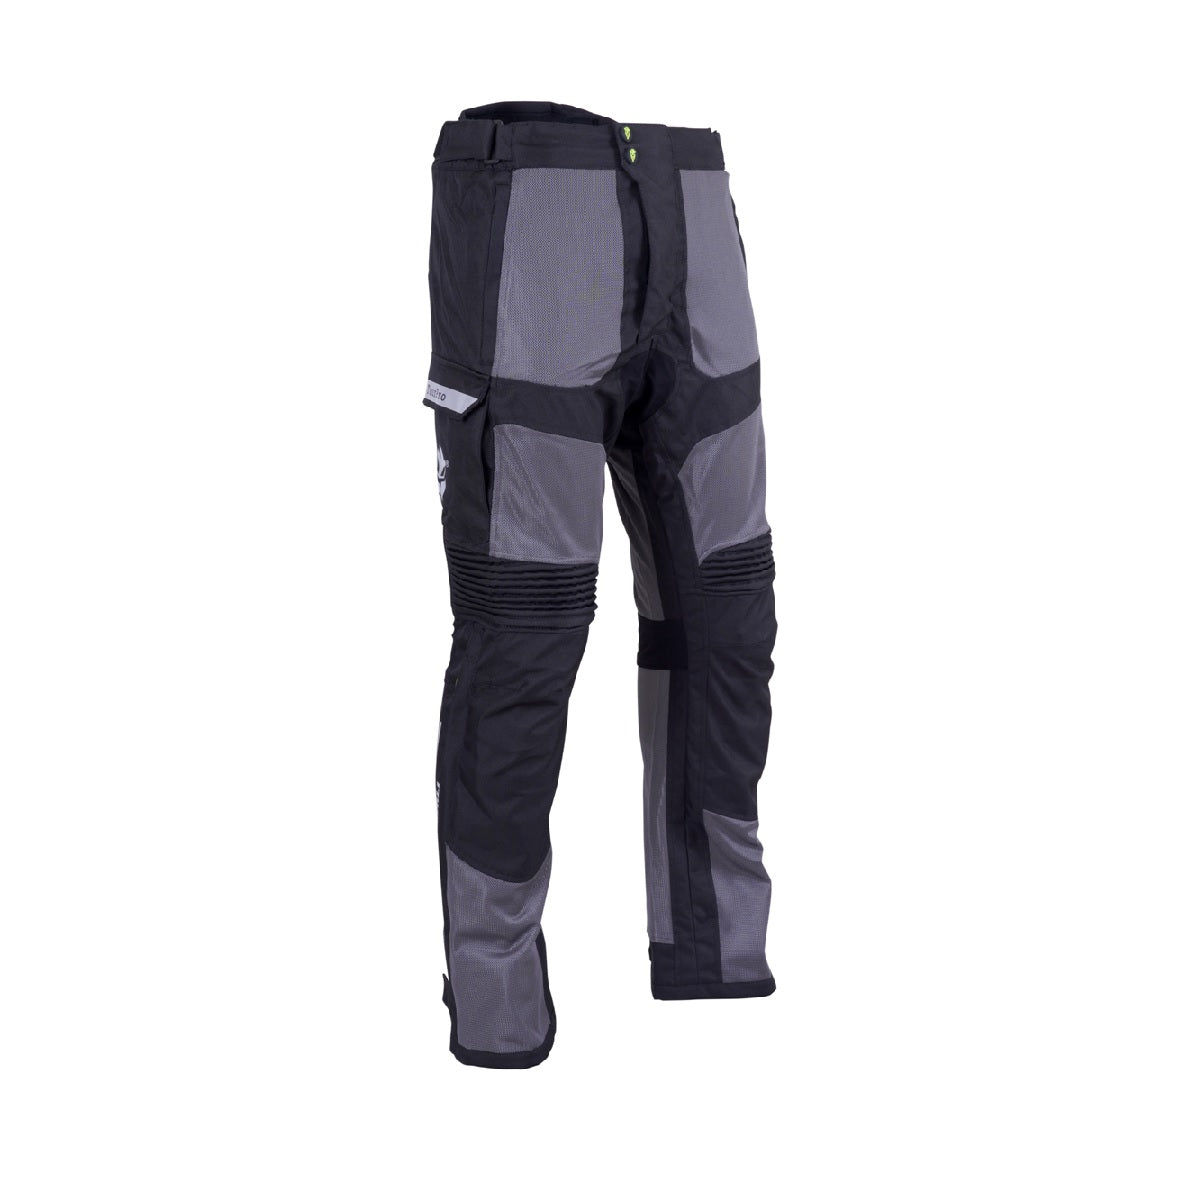 Motorcycle pants | Shop for CE-certified waterproof, textile, leather, and  denim motorcycle pants